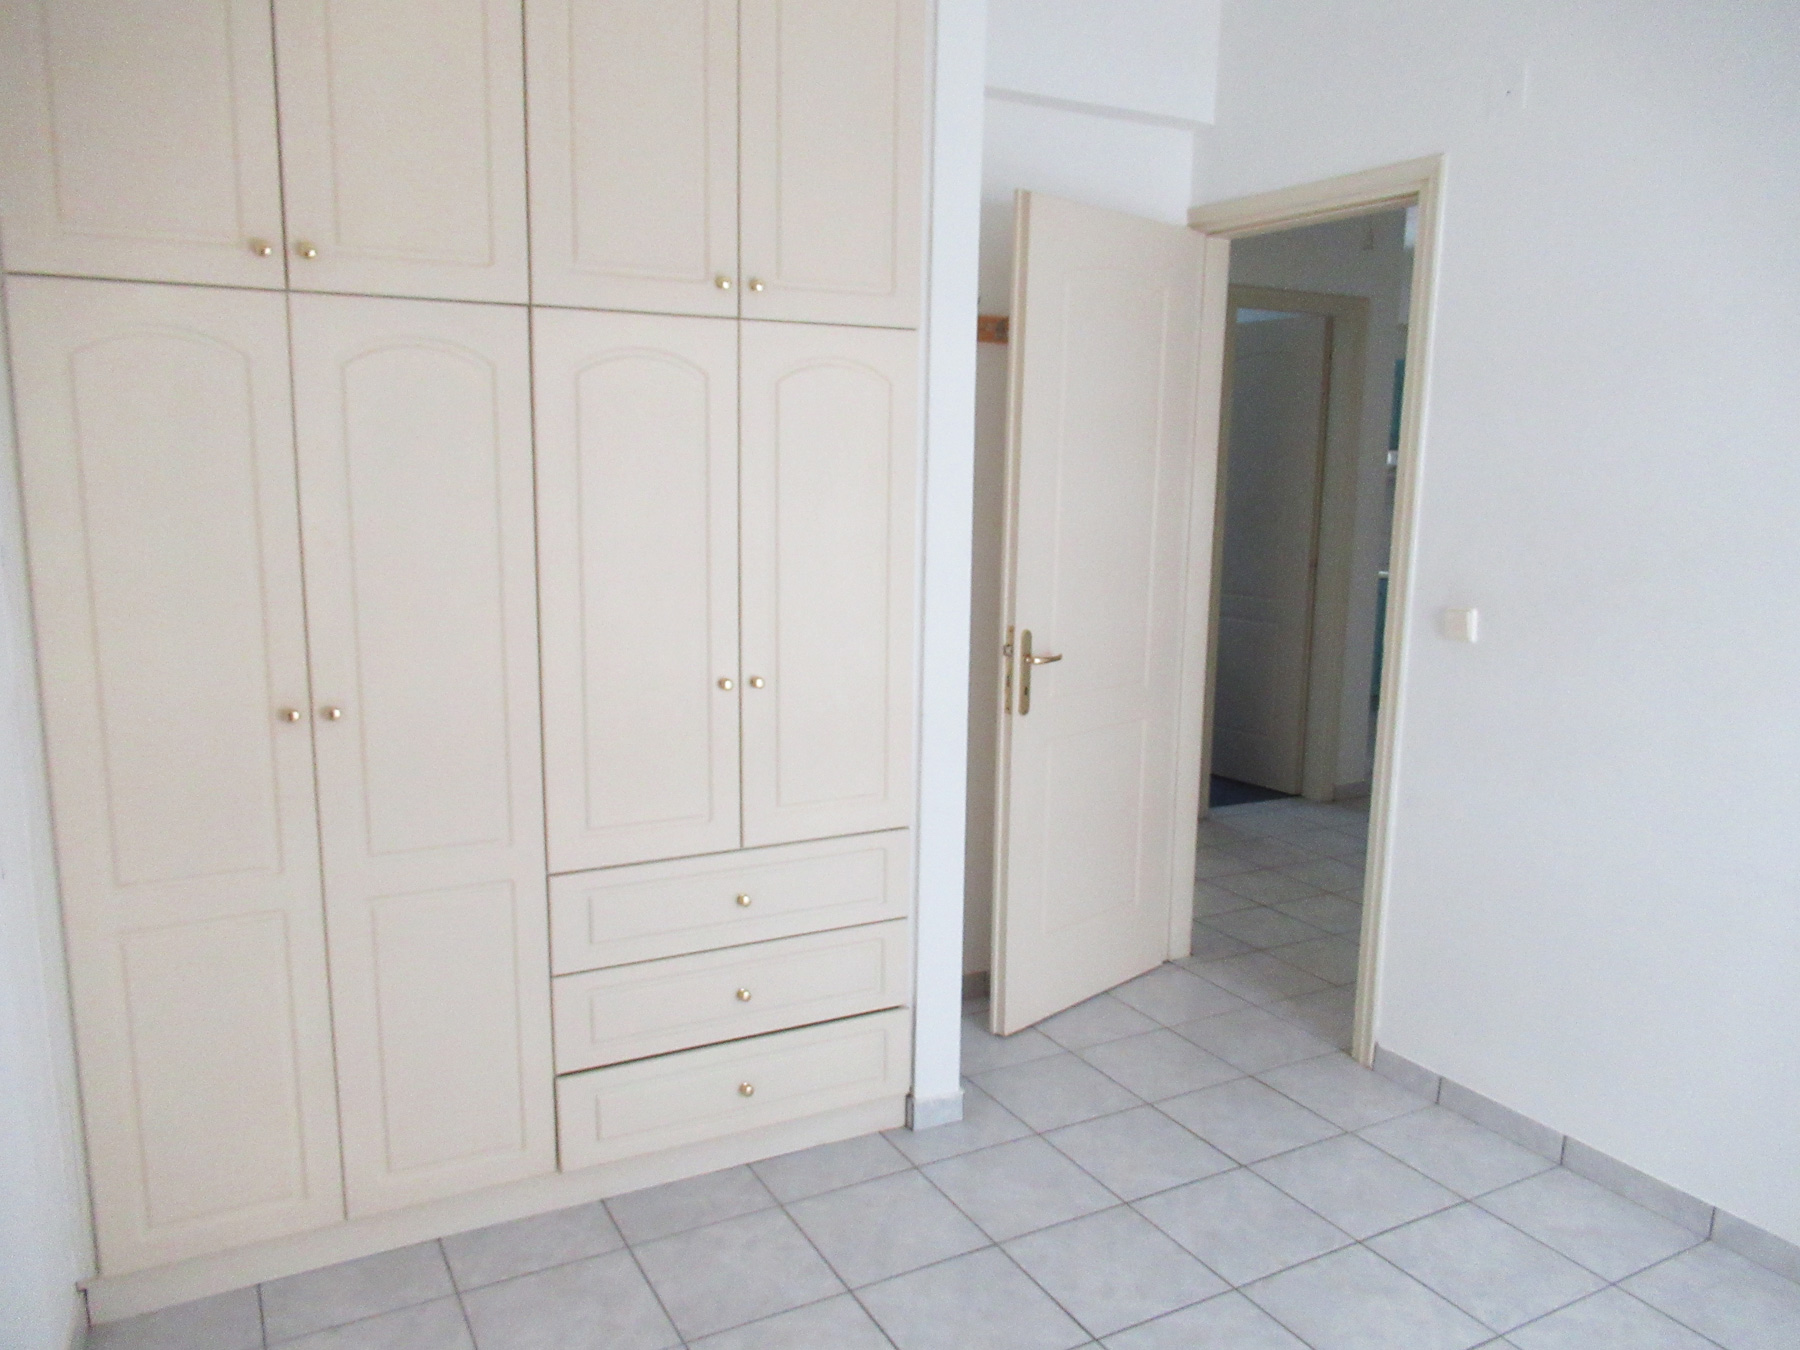 For rent 2-room apartment of 57 sq.m. on the 1st floor in the center of Ioannina